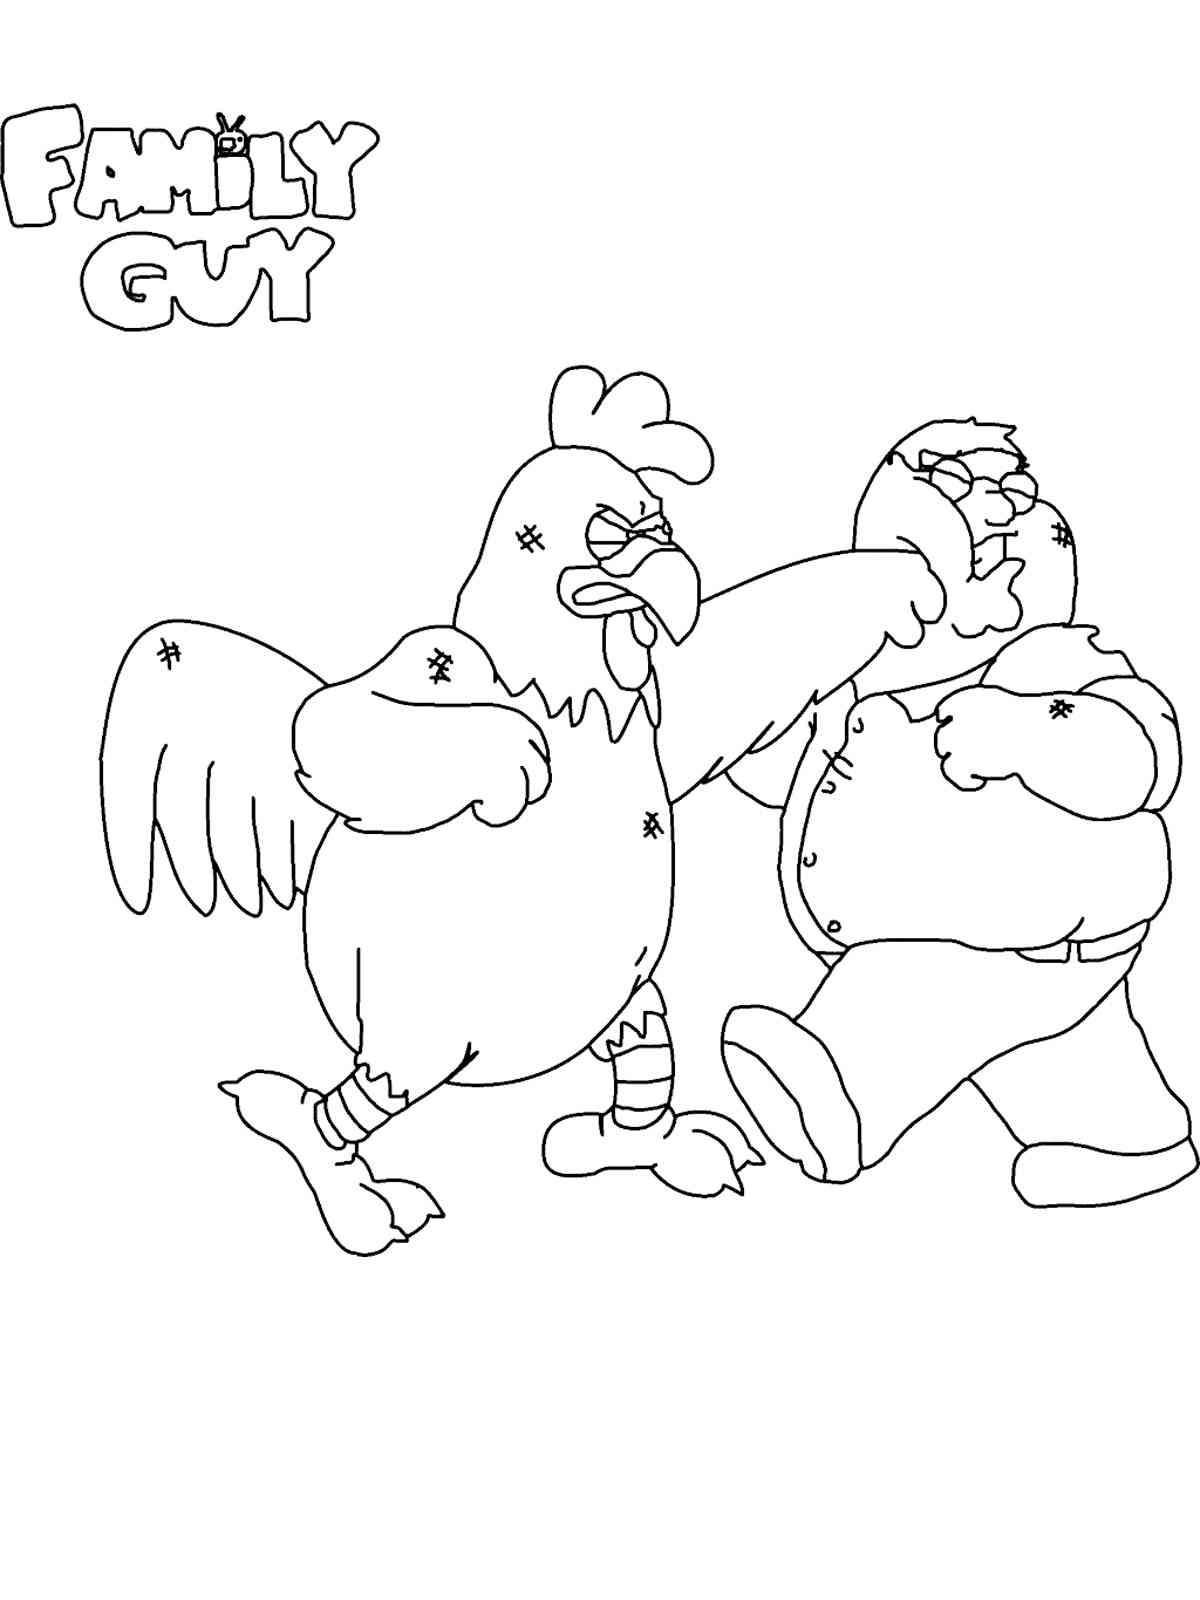 Family Guy 20 coloring page